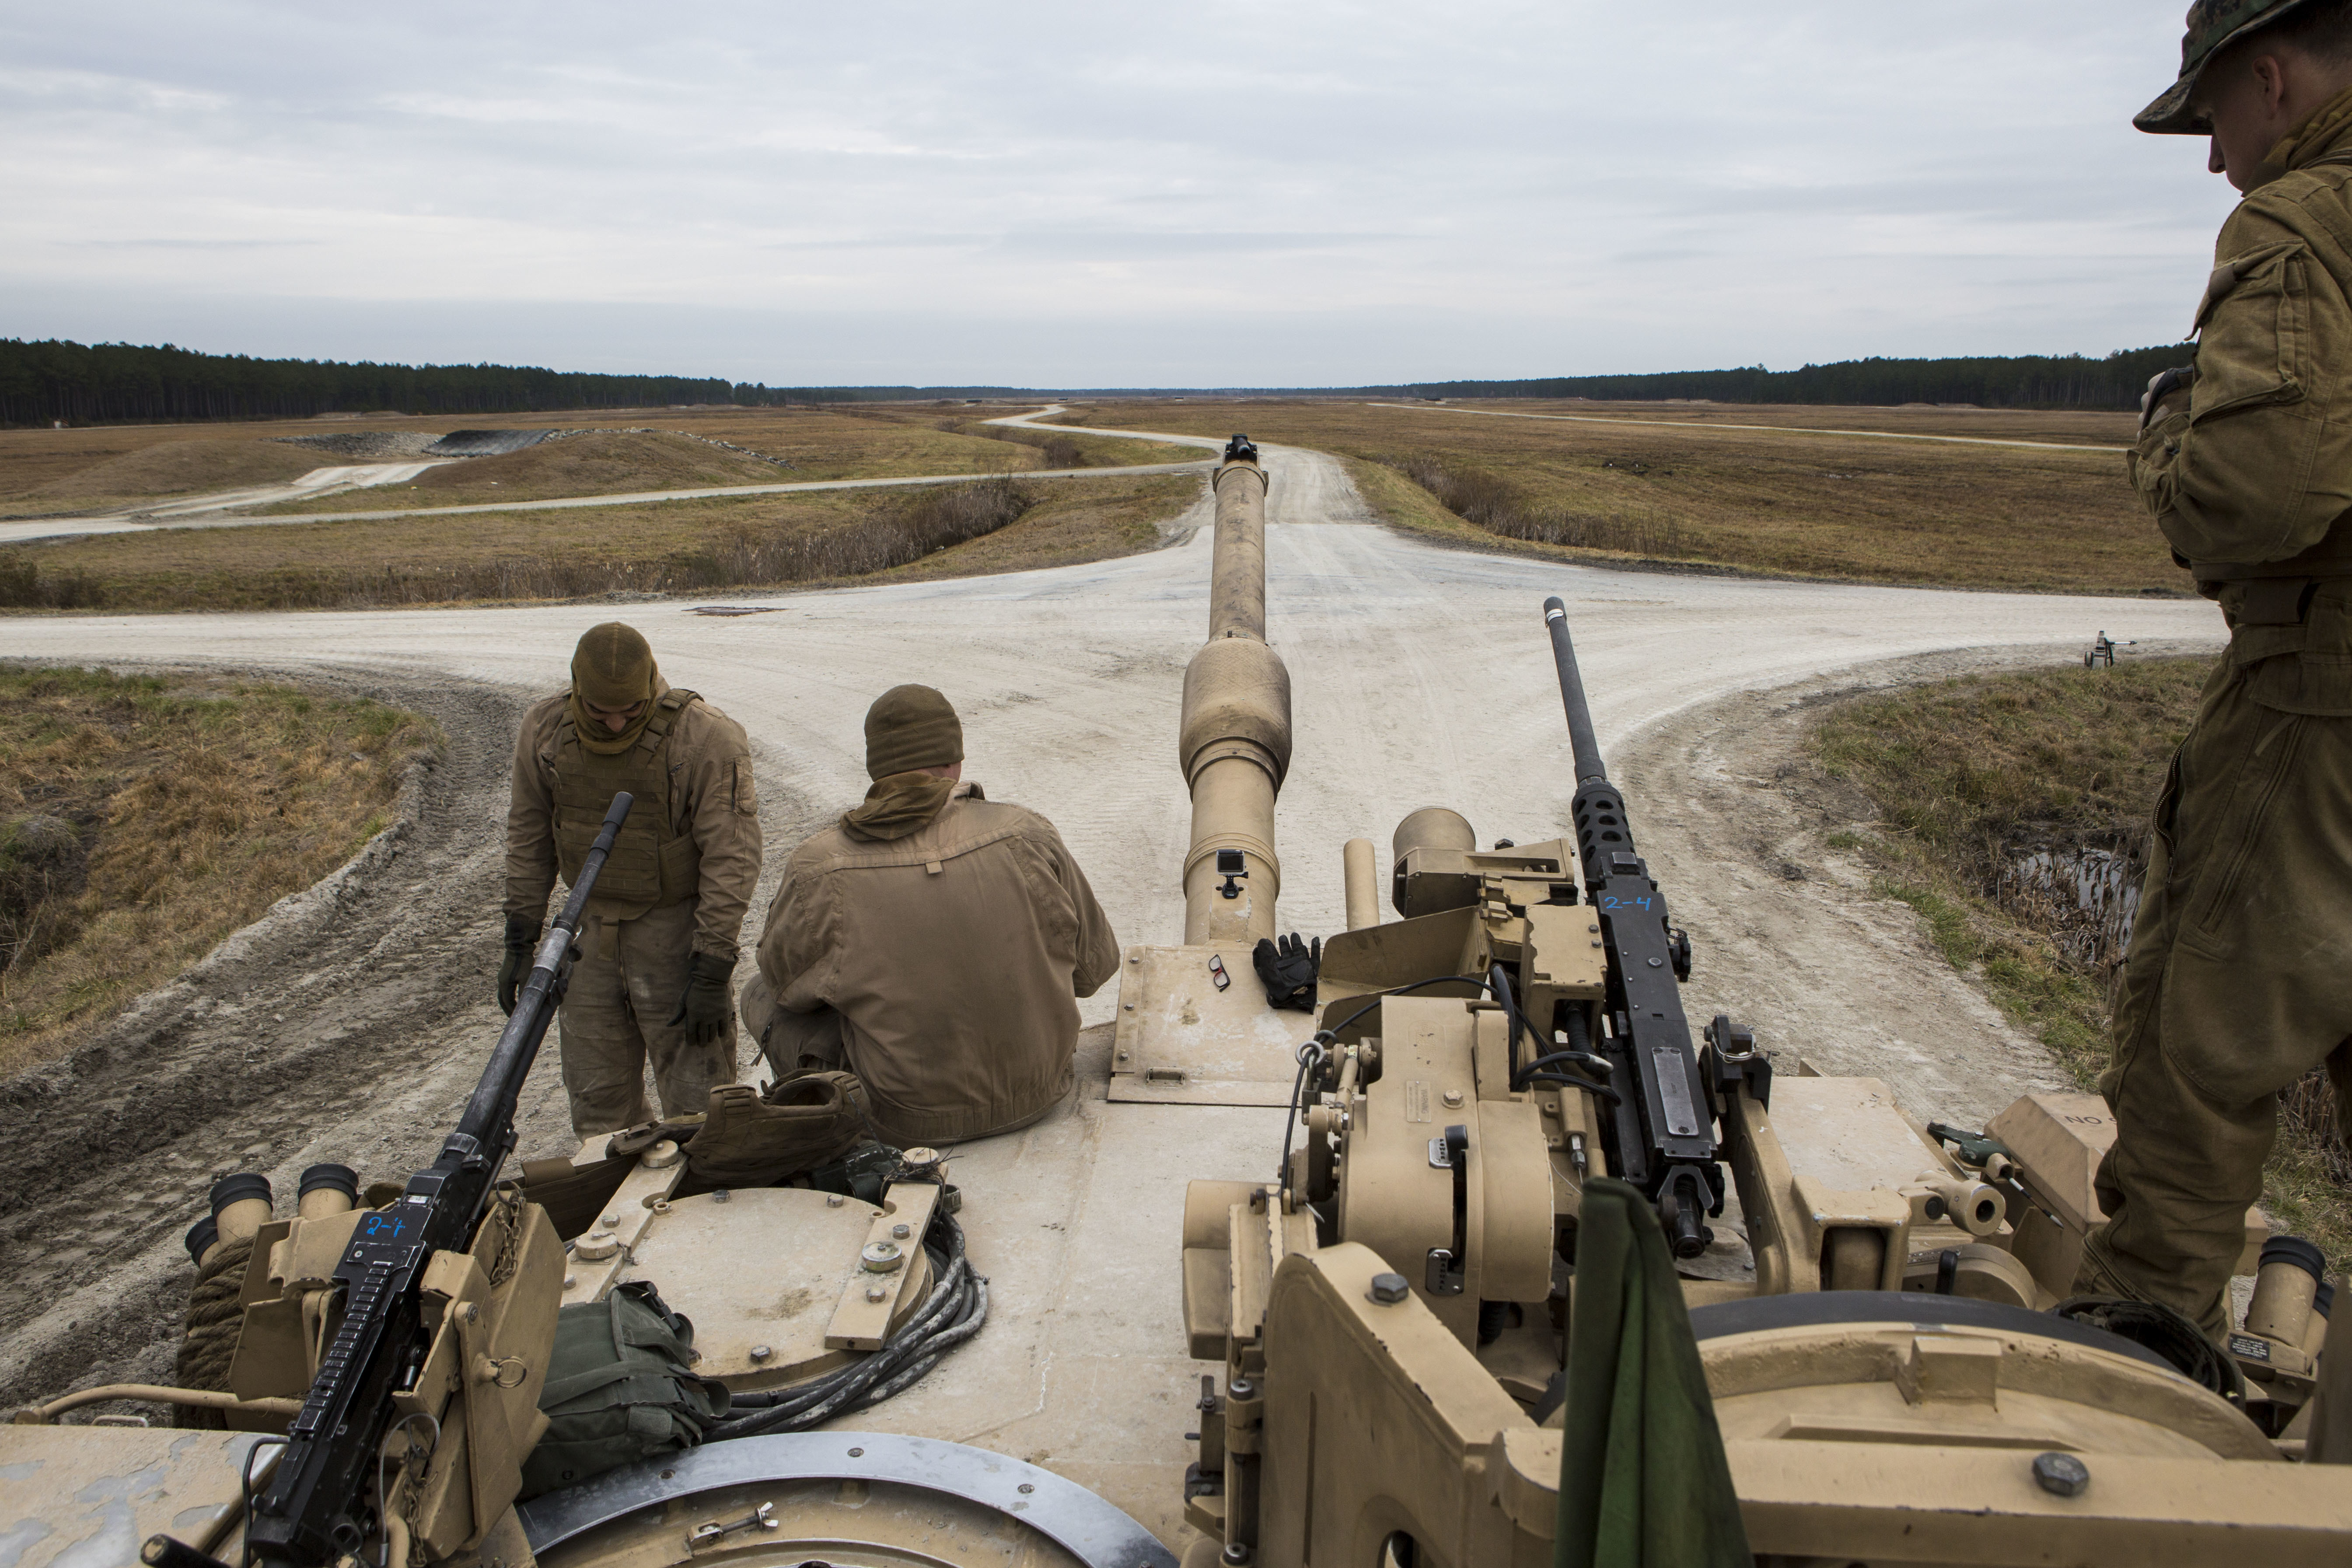 U.S. Marines with Company B, 2nd Tank Battalion, sit on an M1A1 Abrams Main Battle Tank during a live-fire exercise at Range SR-10, Camp Lejeune, N.C., Jan. 28, 2016. 2nd Tank Battalion conducted marksmanship qualifications during a month-long field exercise. (U.S. Marine Corps photo by Lance Cpl. Judith L. Harter, MCIEAST Combat Camera/Released)